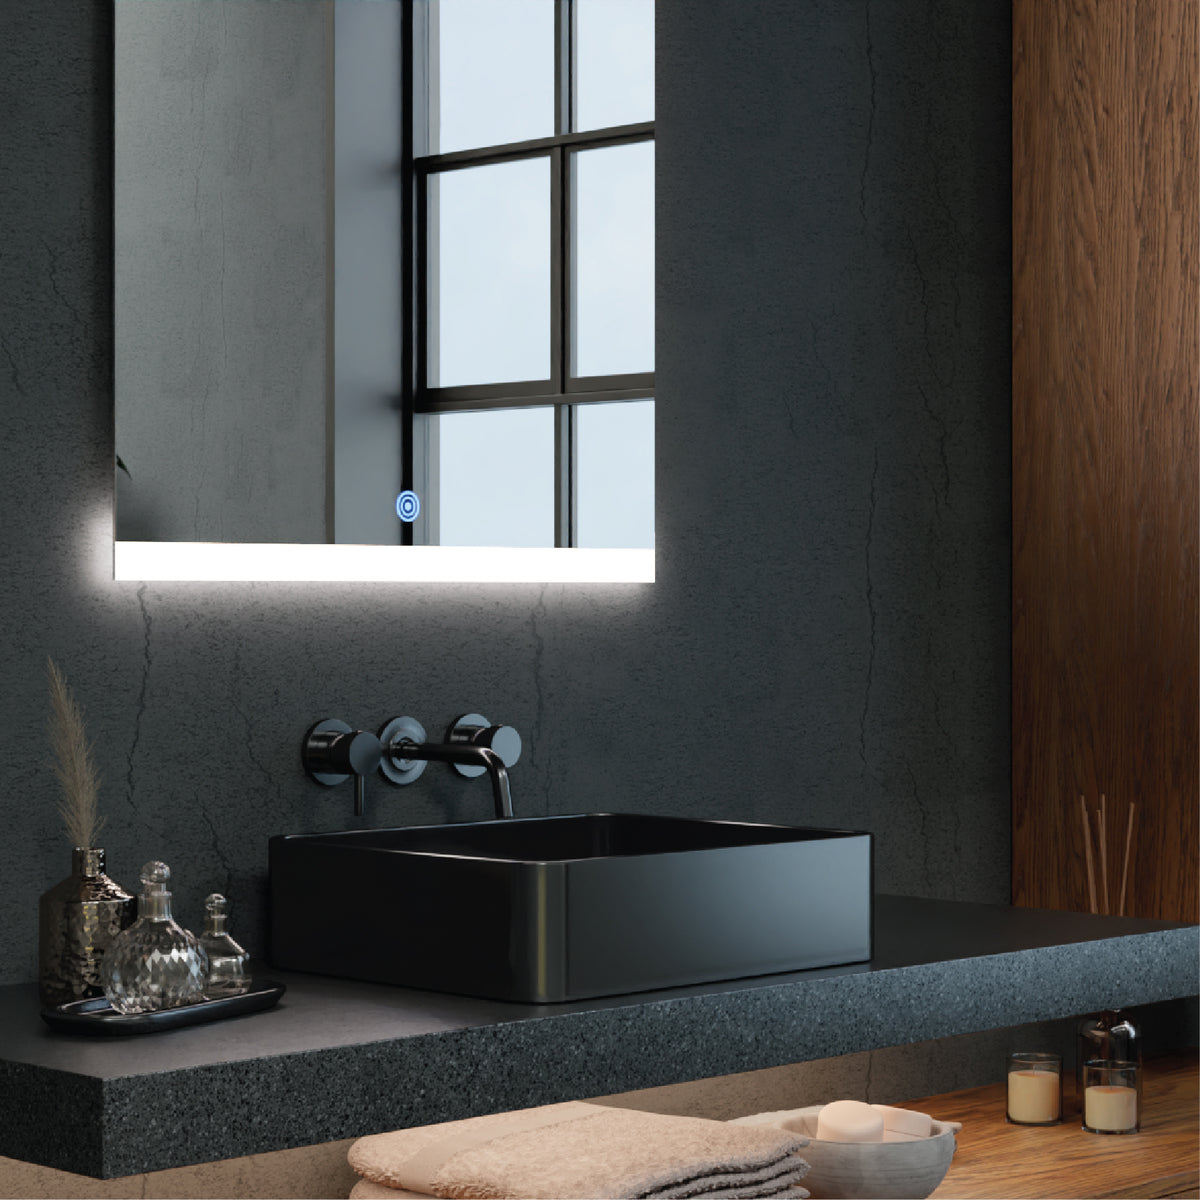 Titan LED Mirror: a statement piece offering a harmonious blend of convenience and elegance.